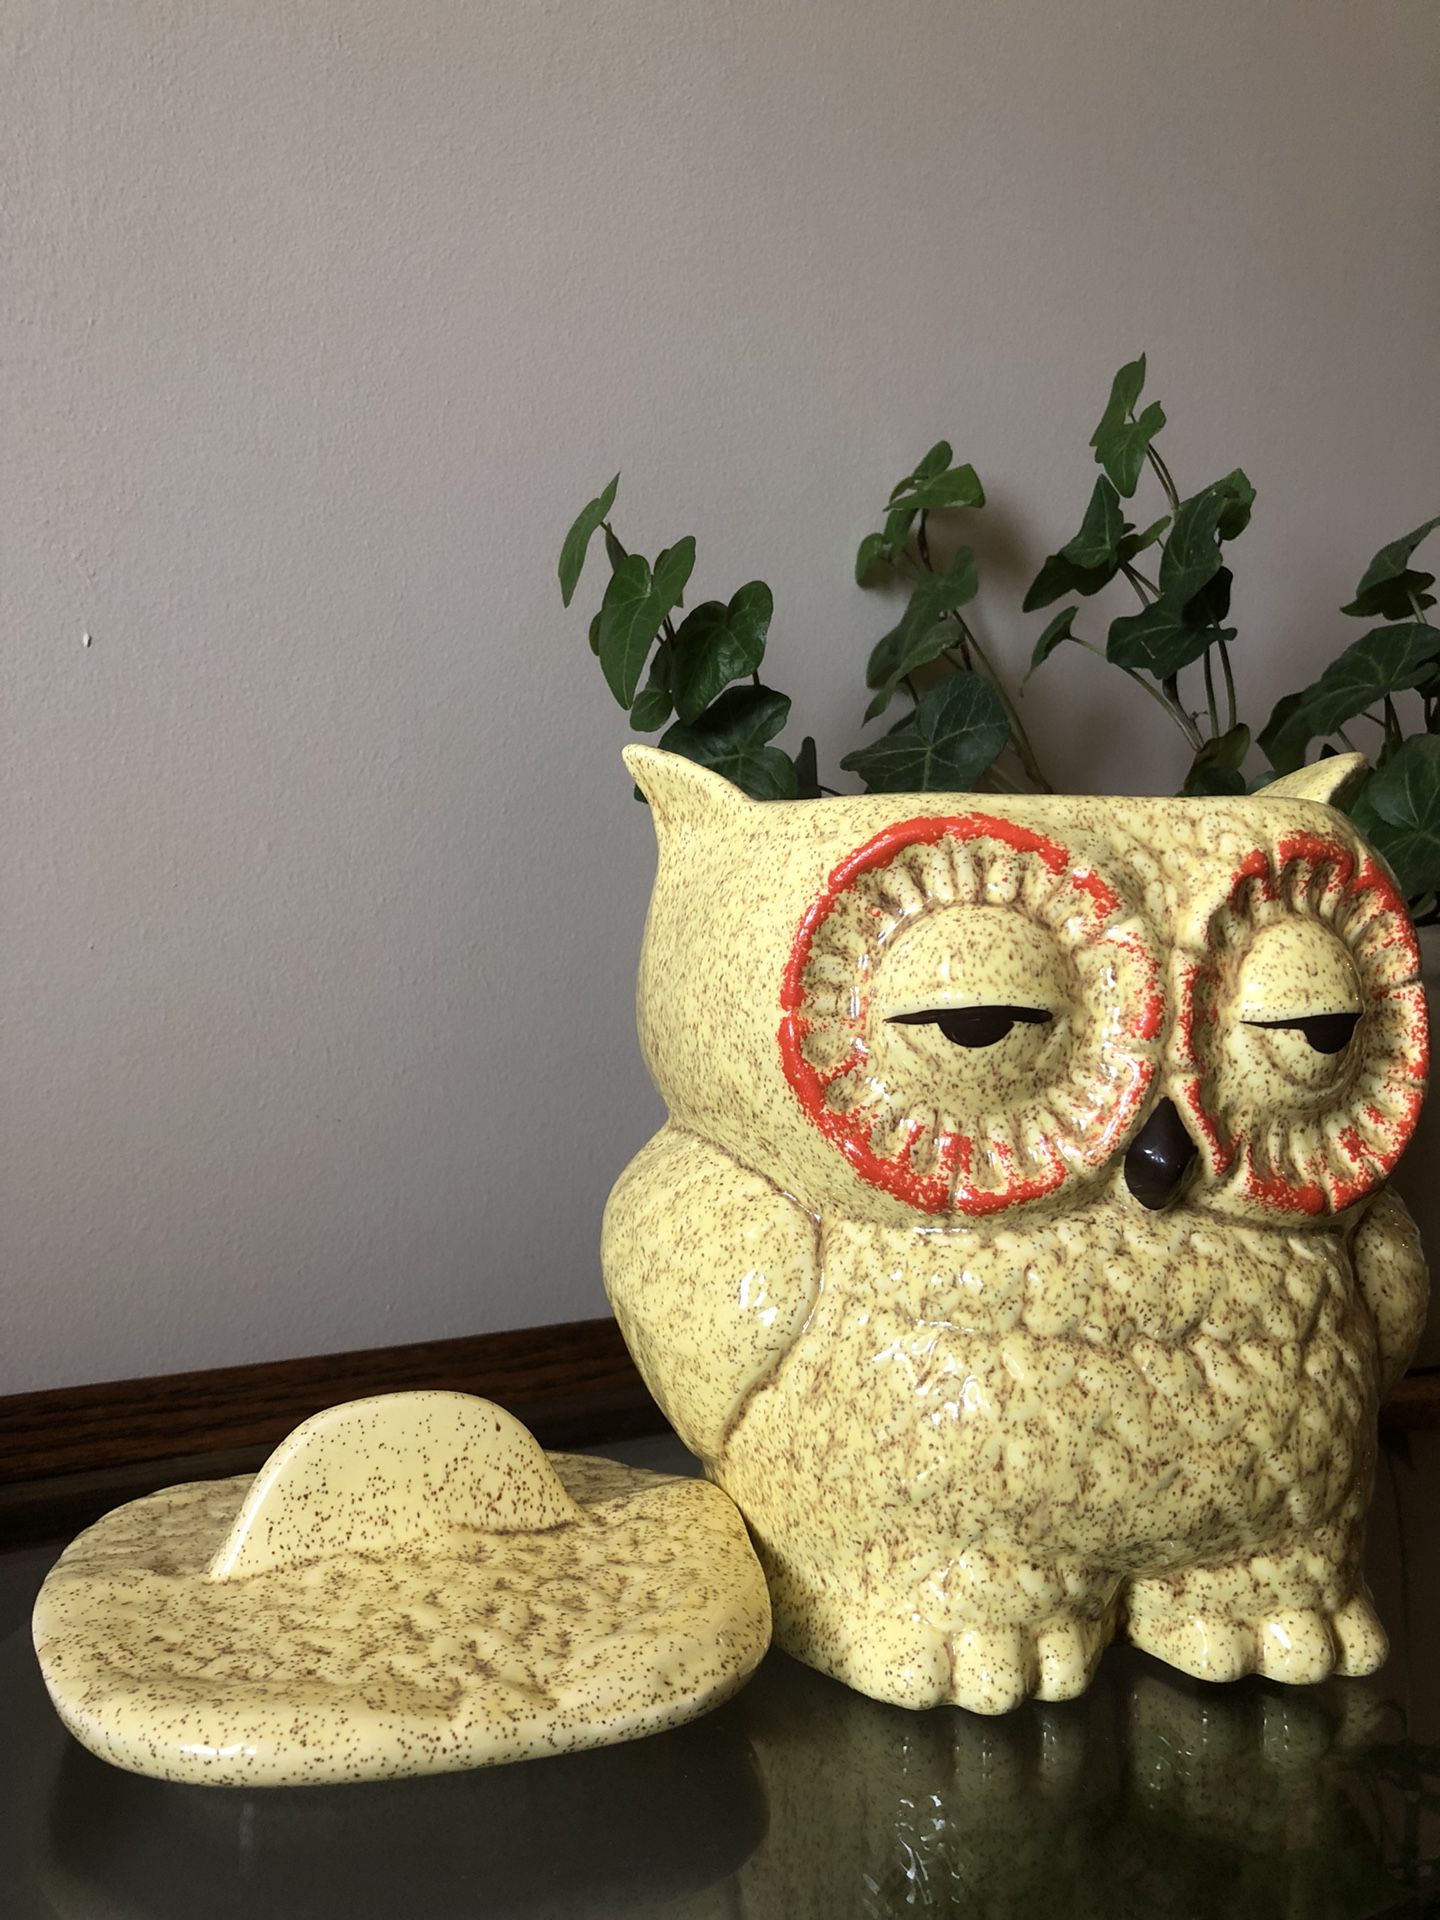 Vintage DWS Clock Face Cookie Jar for Sale in Providence, RI - OfferUp